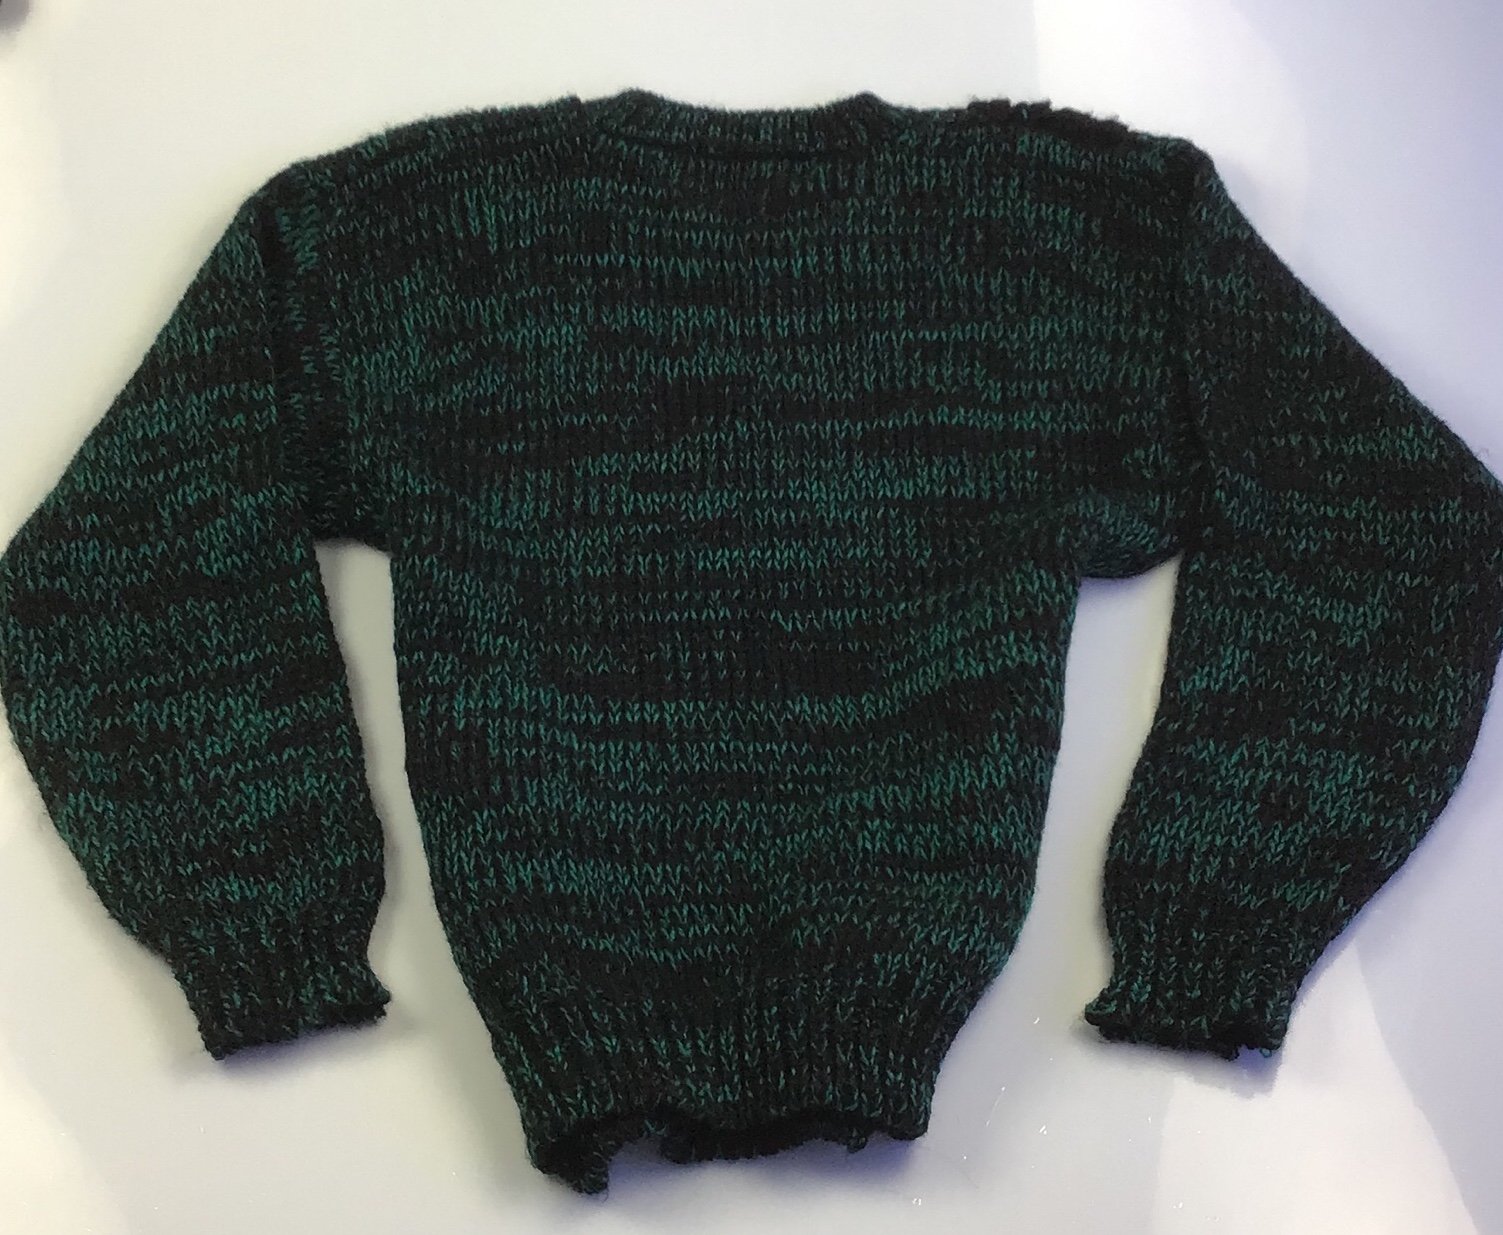 the Lowest price Saturdays women’s knitted crewneck sweater green/black size L ppGRrrkCg Store Online